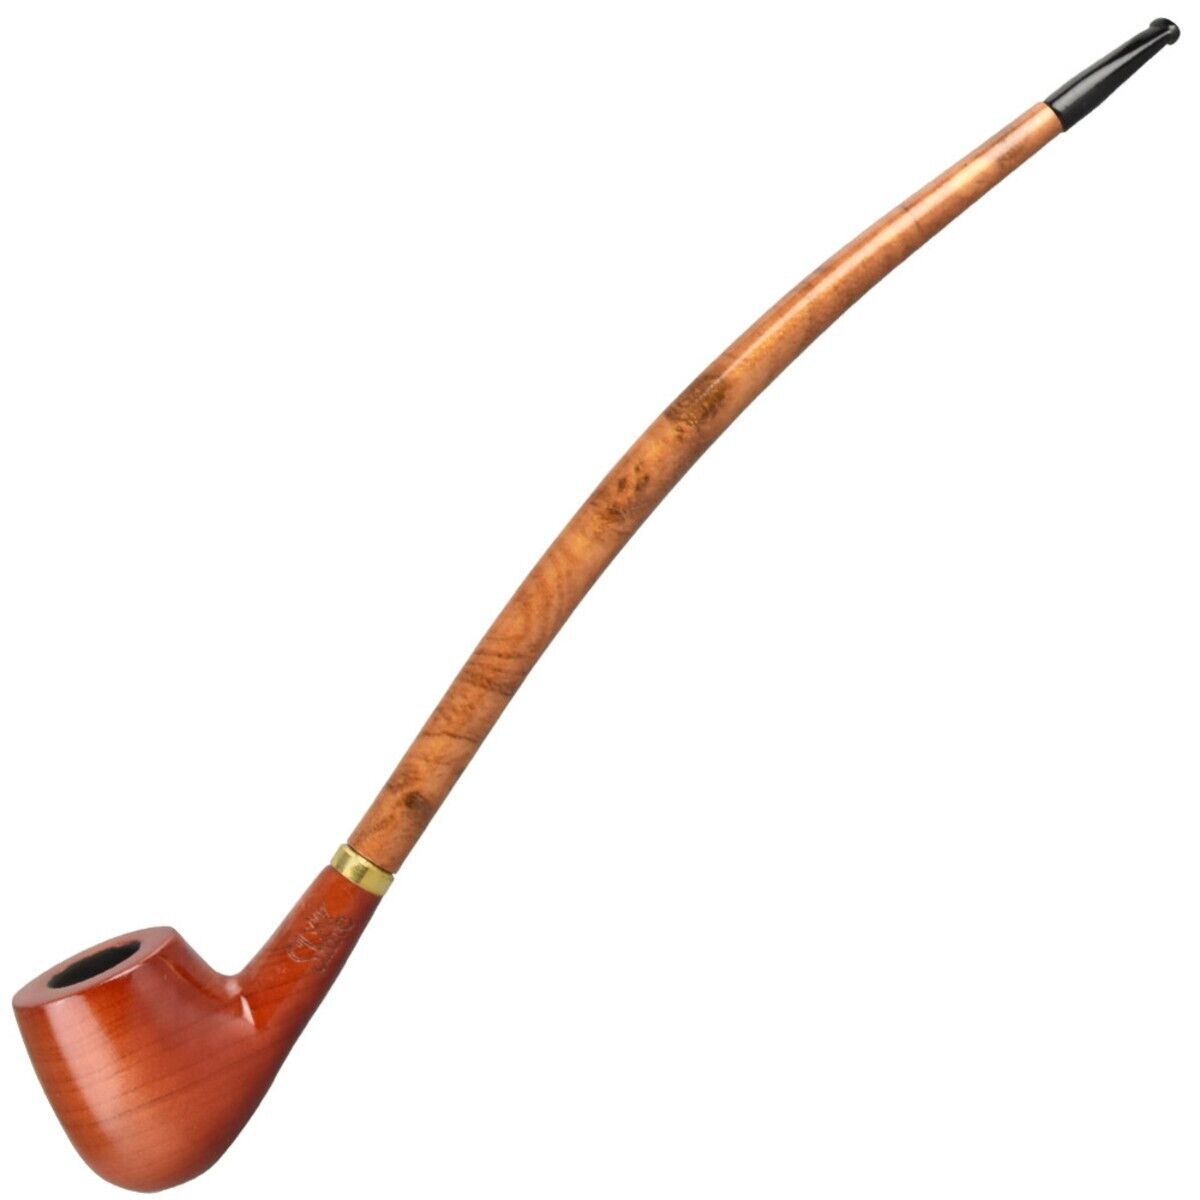 Pulsar Shire Pipes Apple Churchwarden Cherry Wood Pipe - 11.5”